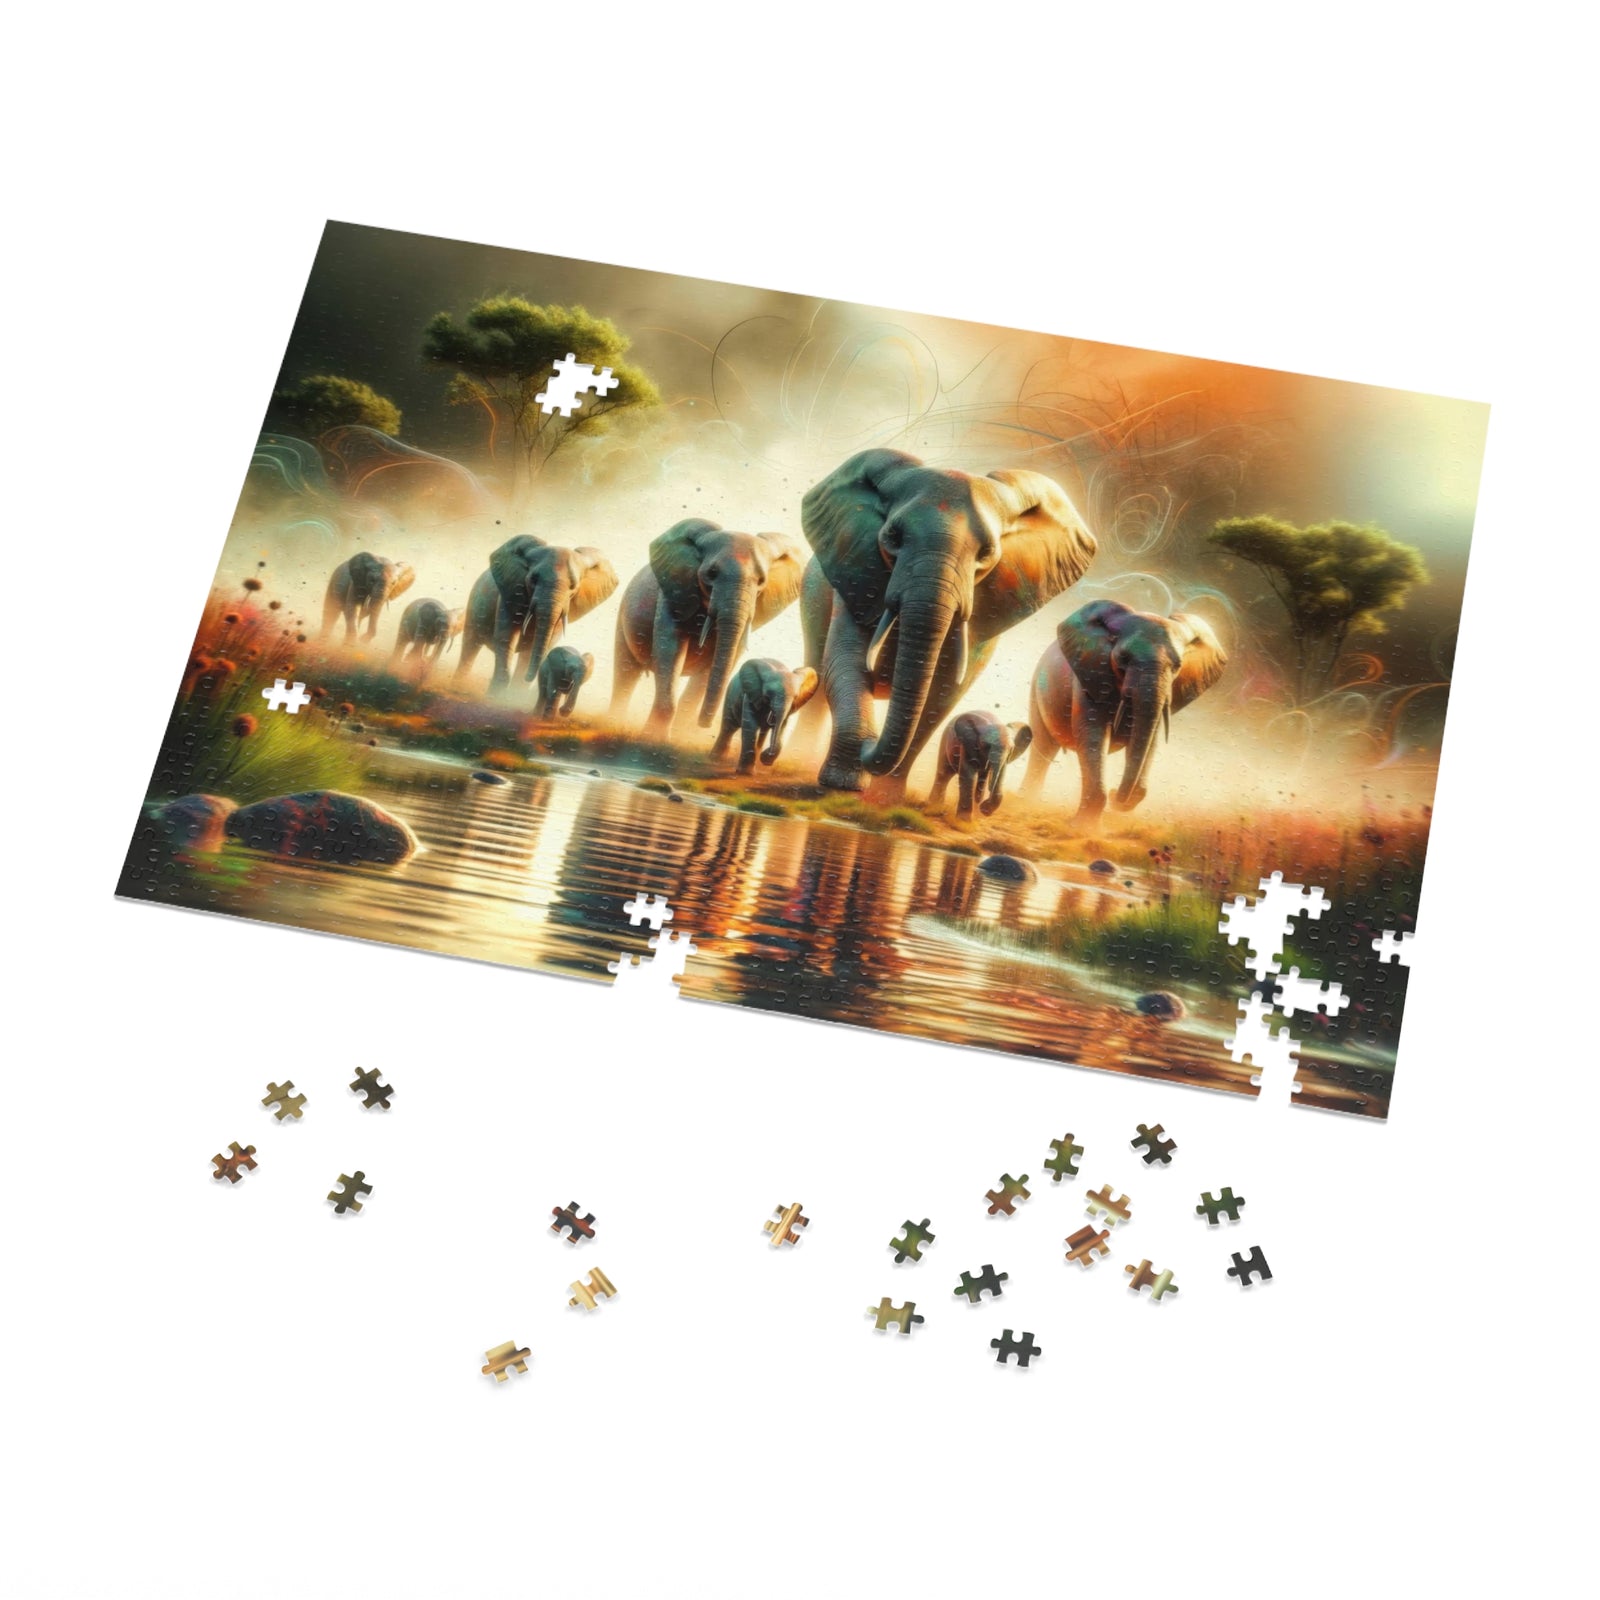 Elephants in Morning Mist Puzzle